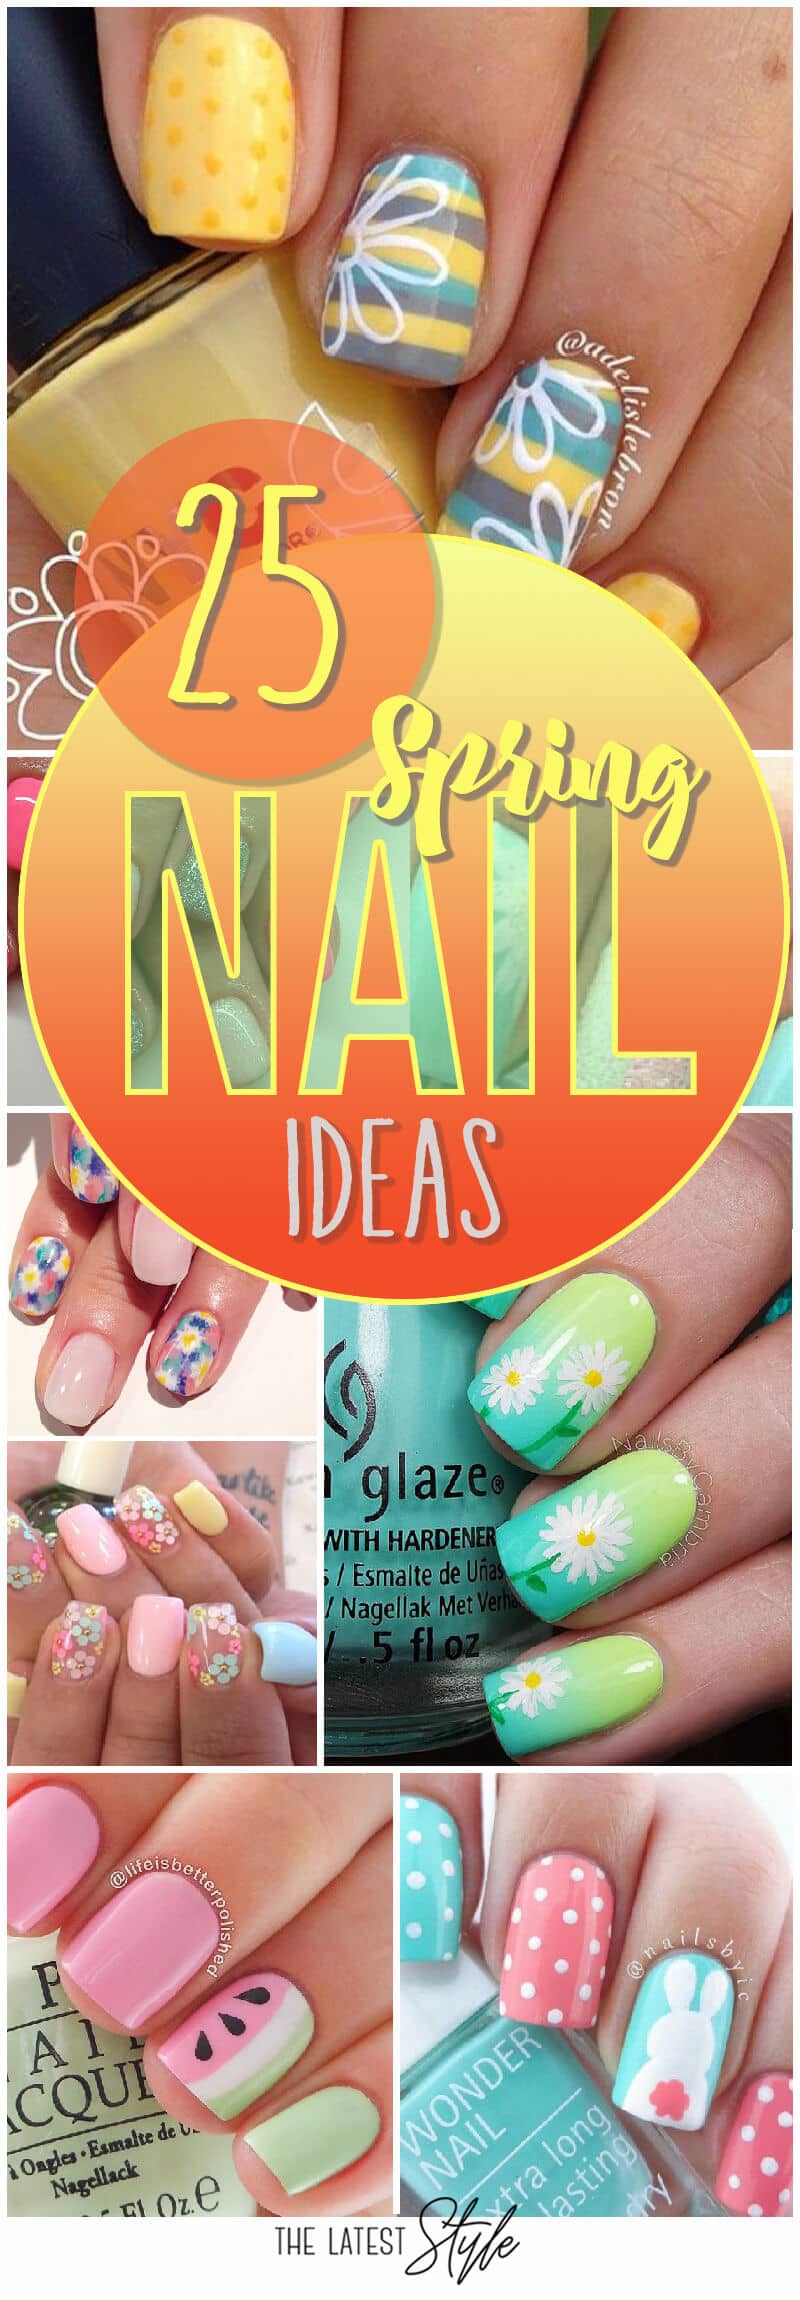 25 Beautiful nail ideas for the spring time!